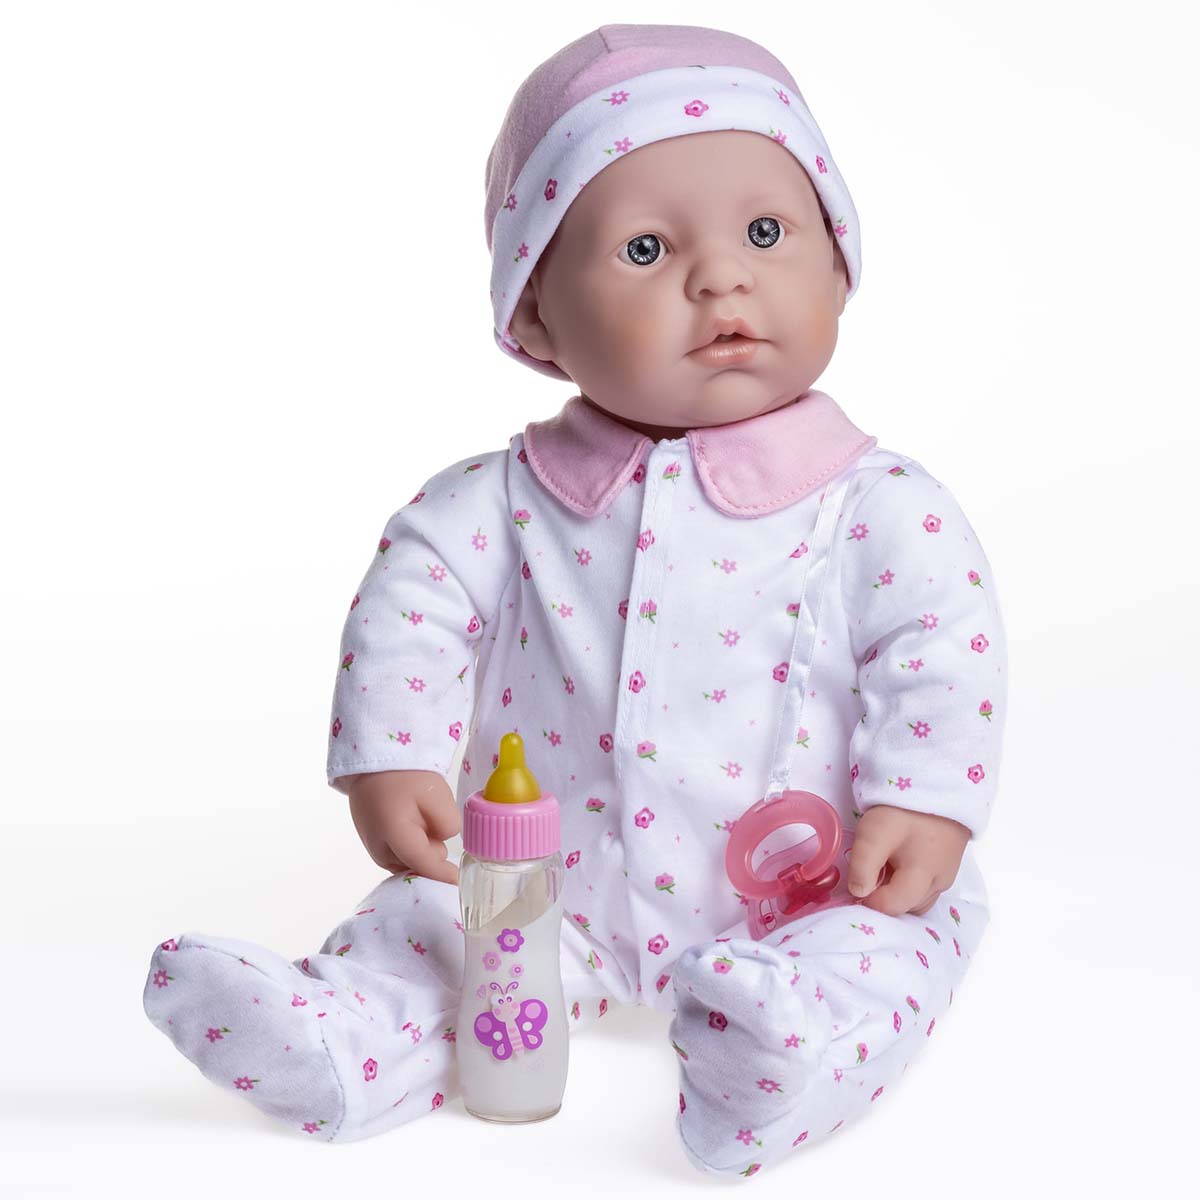 Sleeping doll 51 cm with pajamas, pacifier and bottle